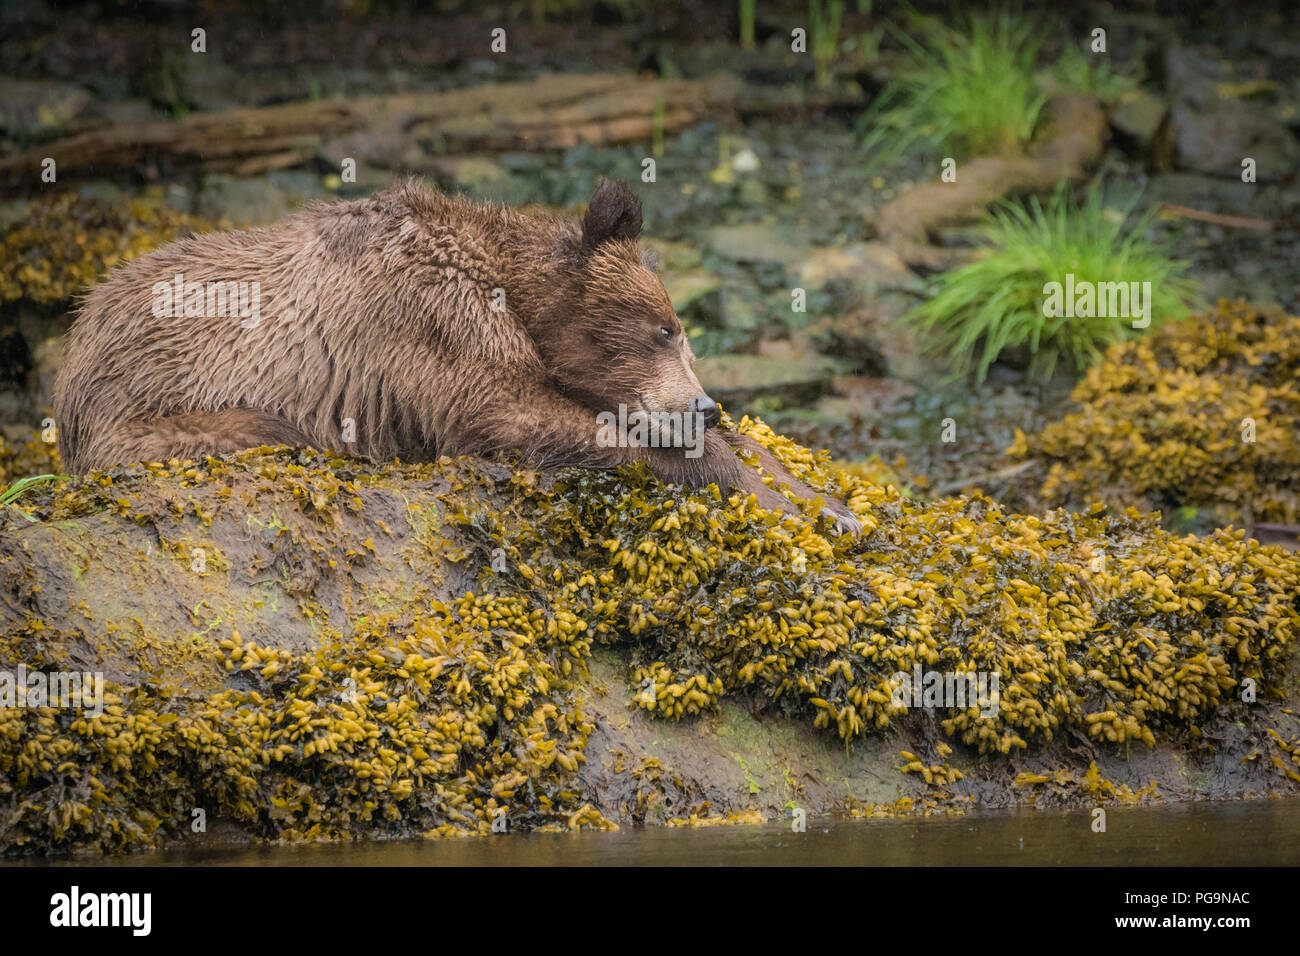 A young grizzly bear (Ursus arctos) rests on the banks of the Khutzeymateen Inlet at low tide, British Columbia, Canada Stock Photo